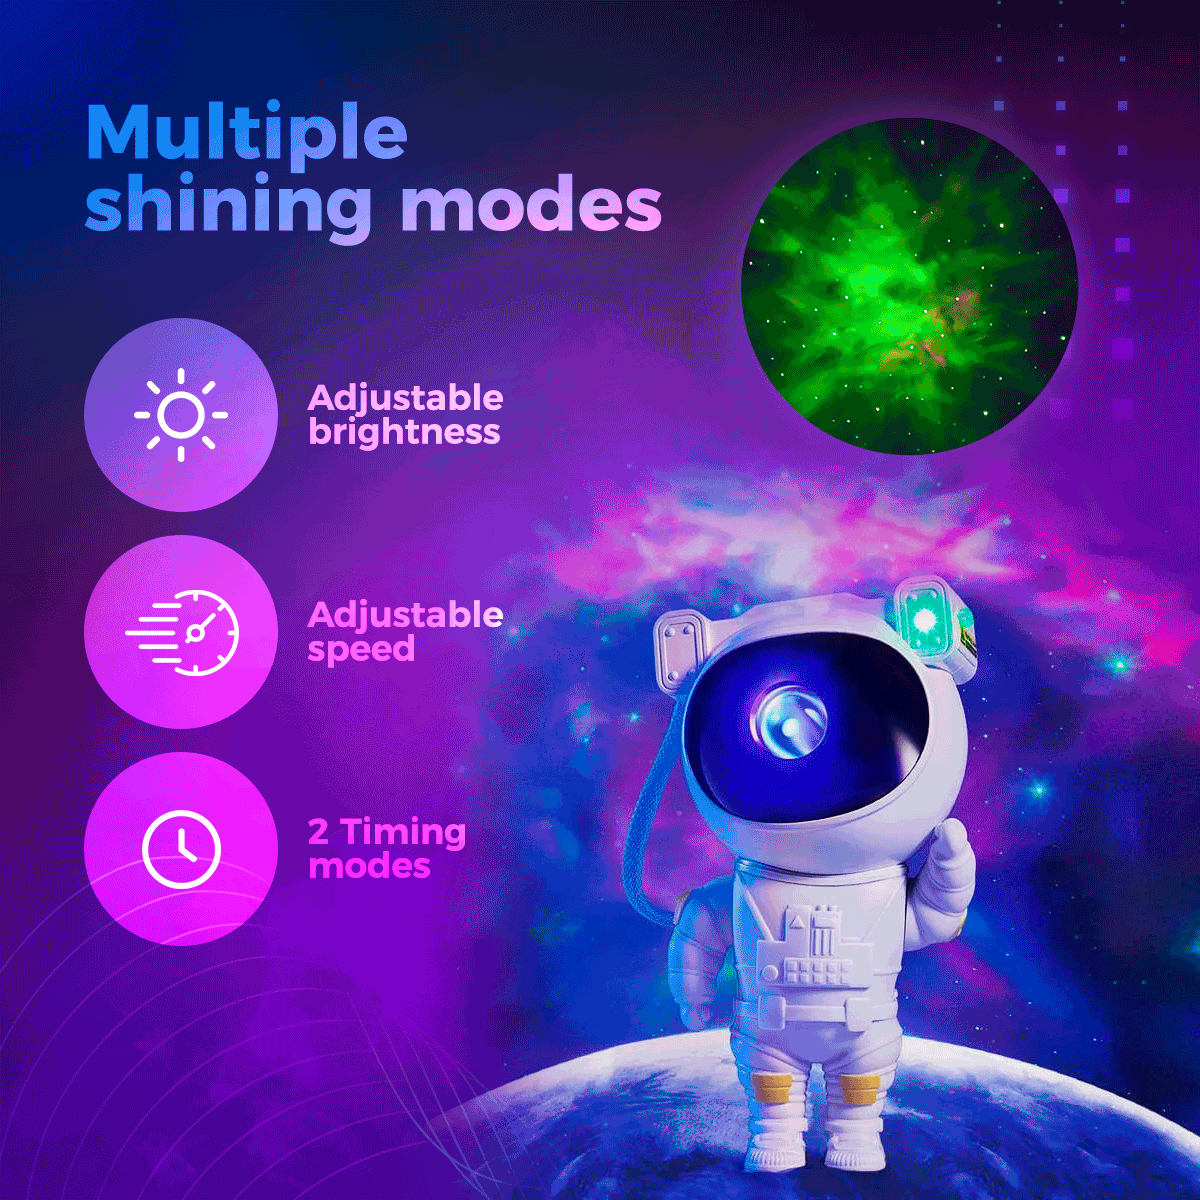 Astronaut Starry Sky Galaxy Projector - Star Projector Night Light, Nebula Projection Lamp with Remote